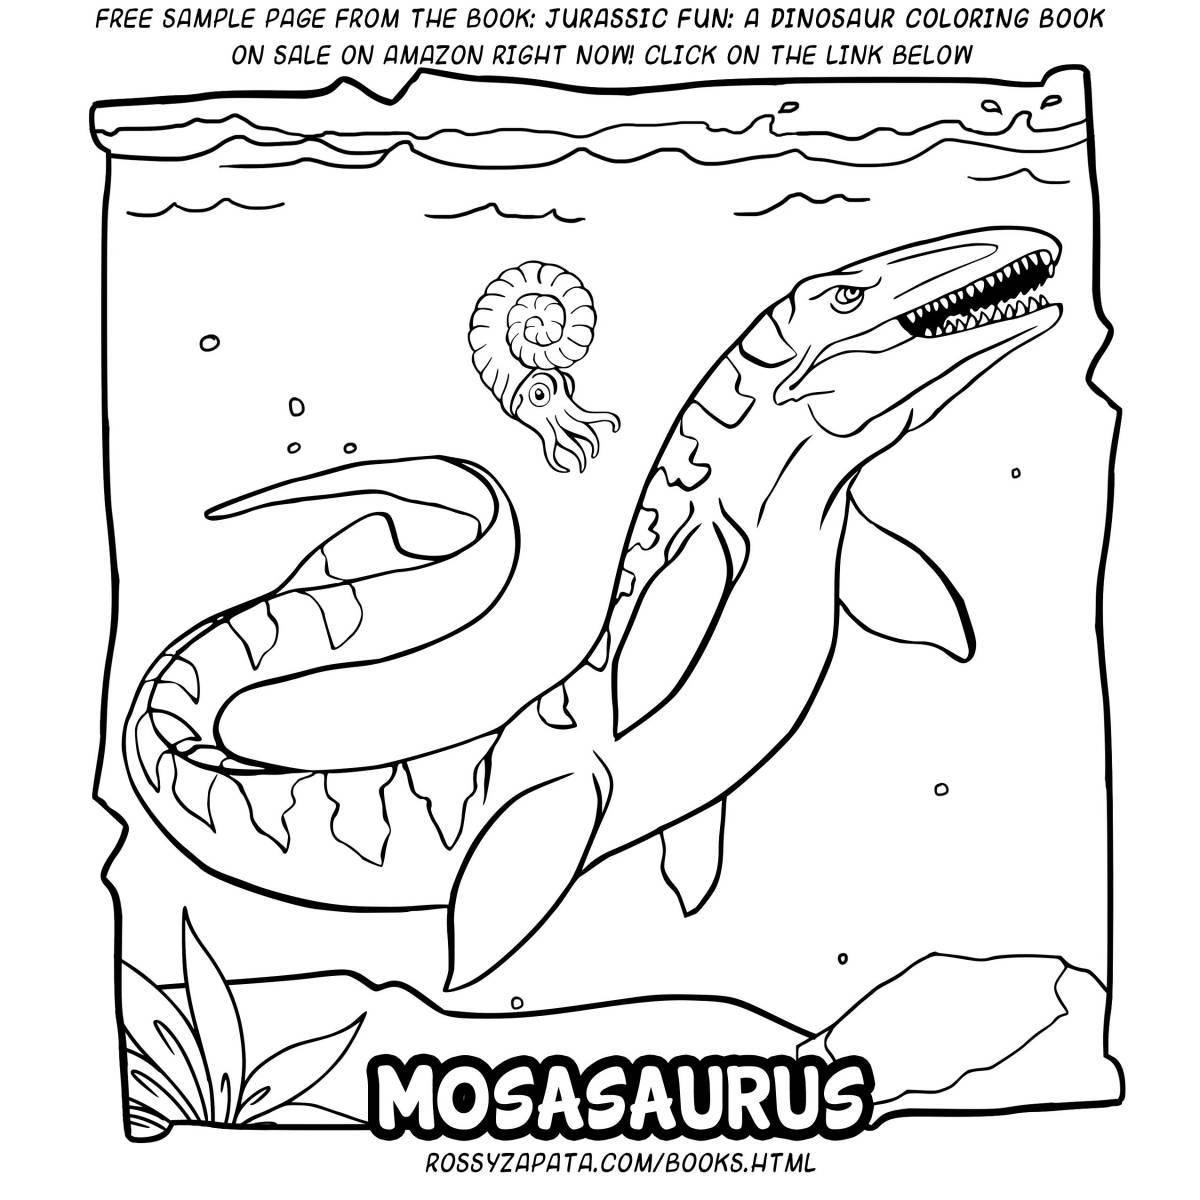 Amazing Mosasaurus coloring book for kids